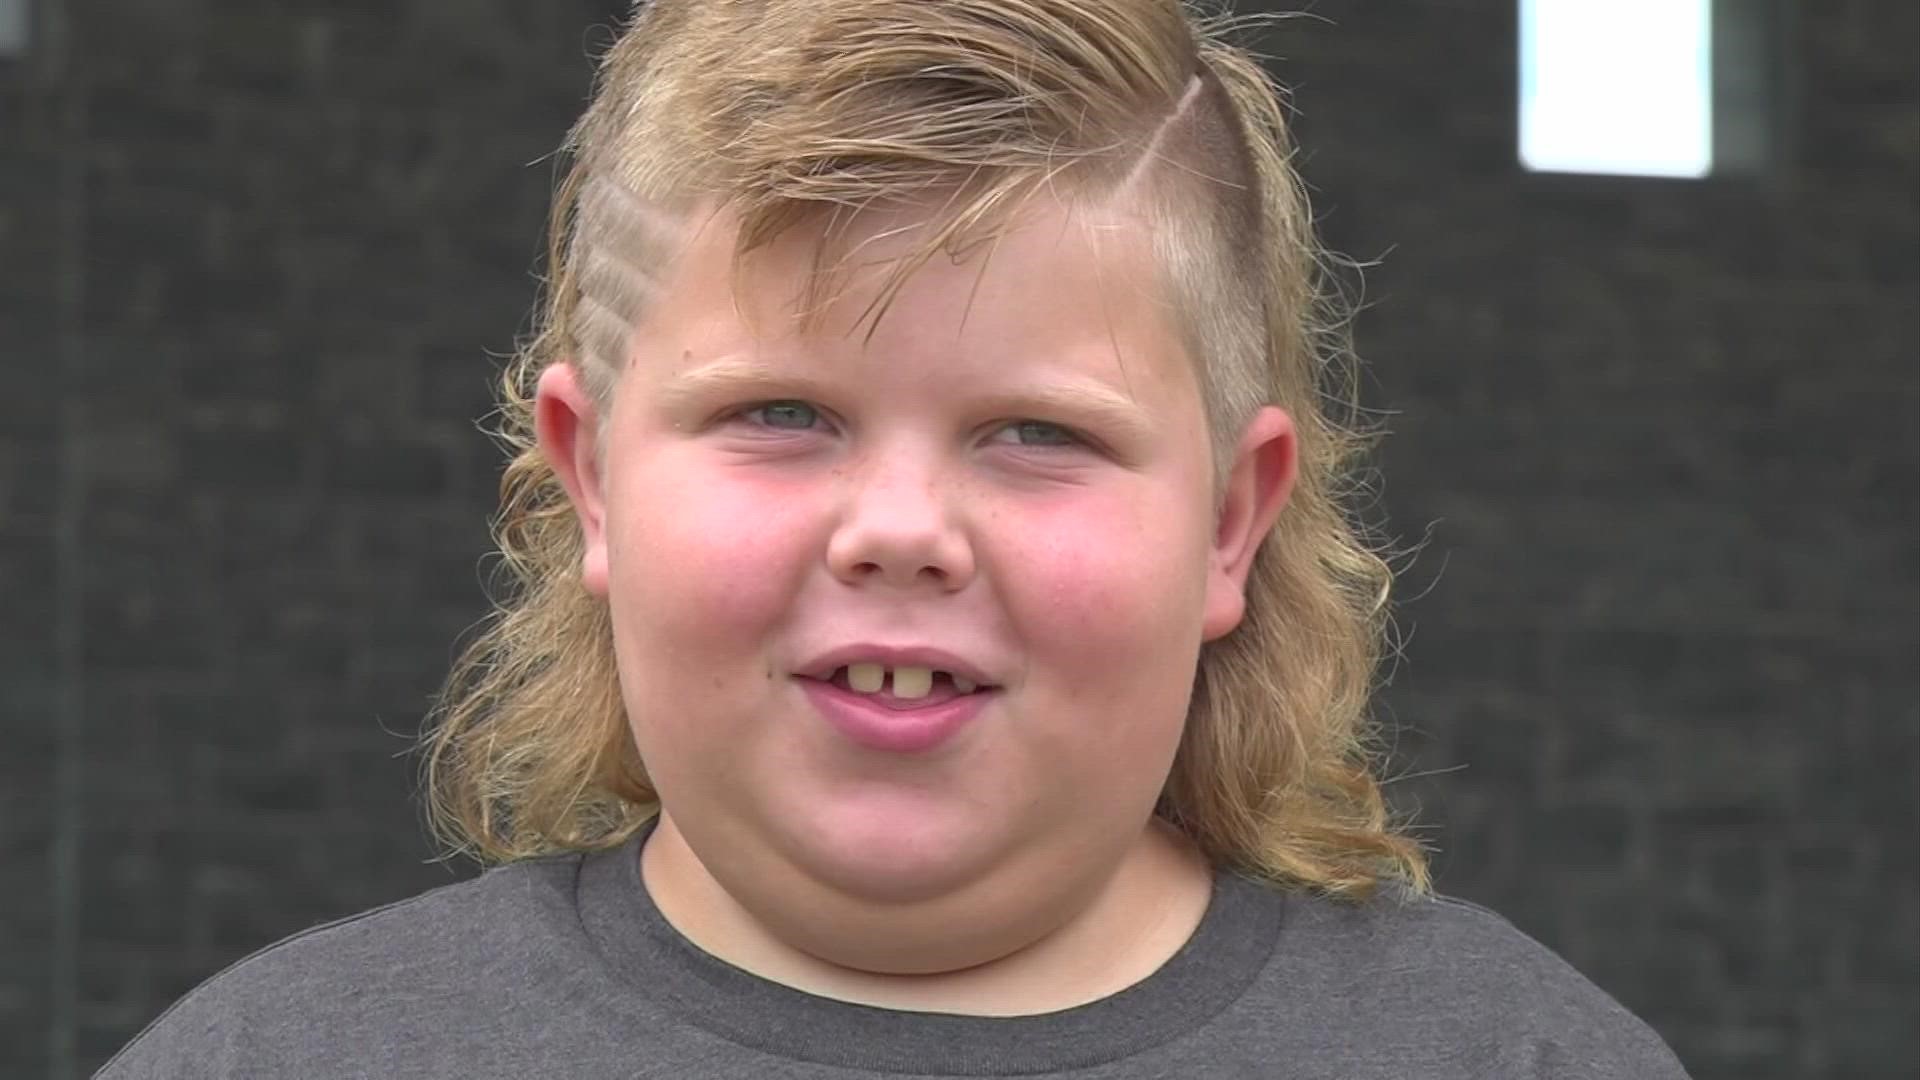 West Pottsgrove 6-year-old competing in national mullet contest